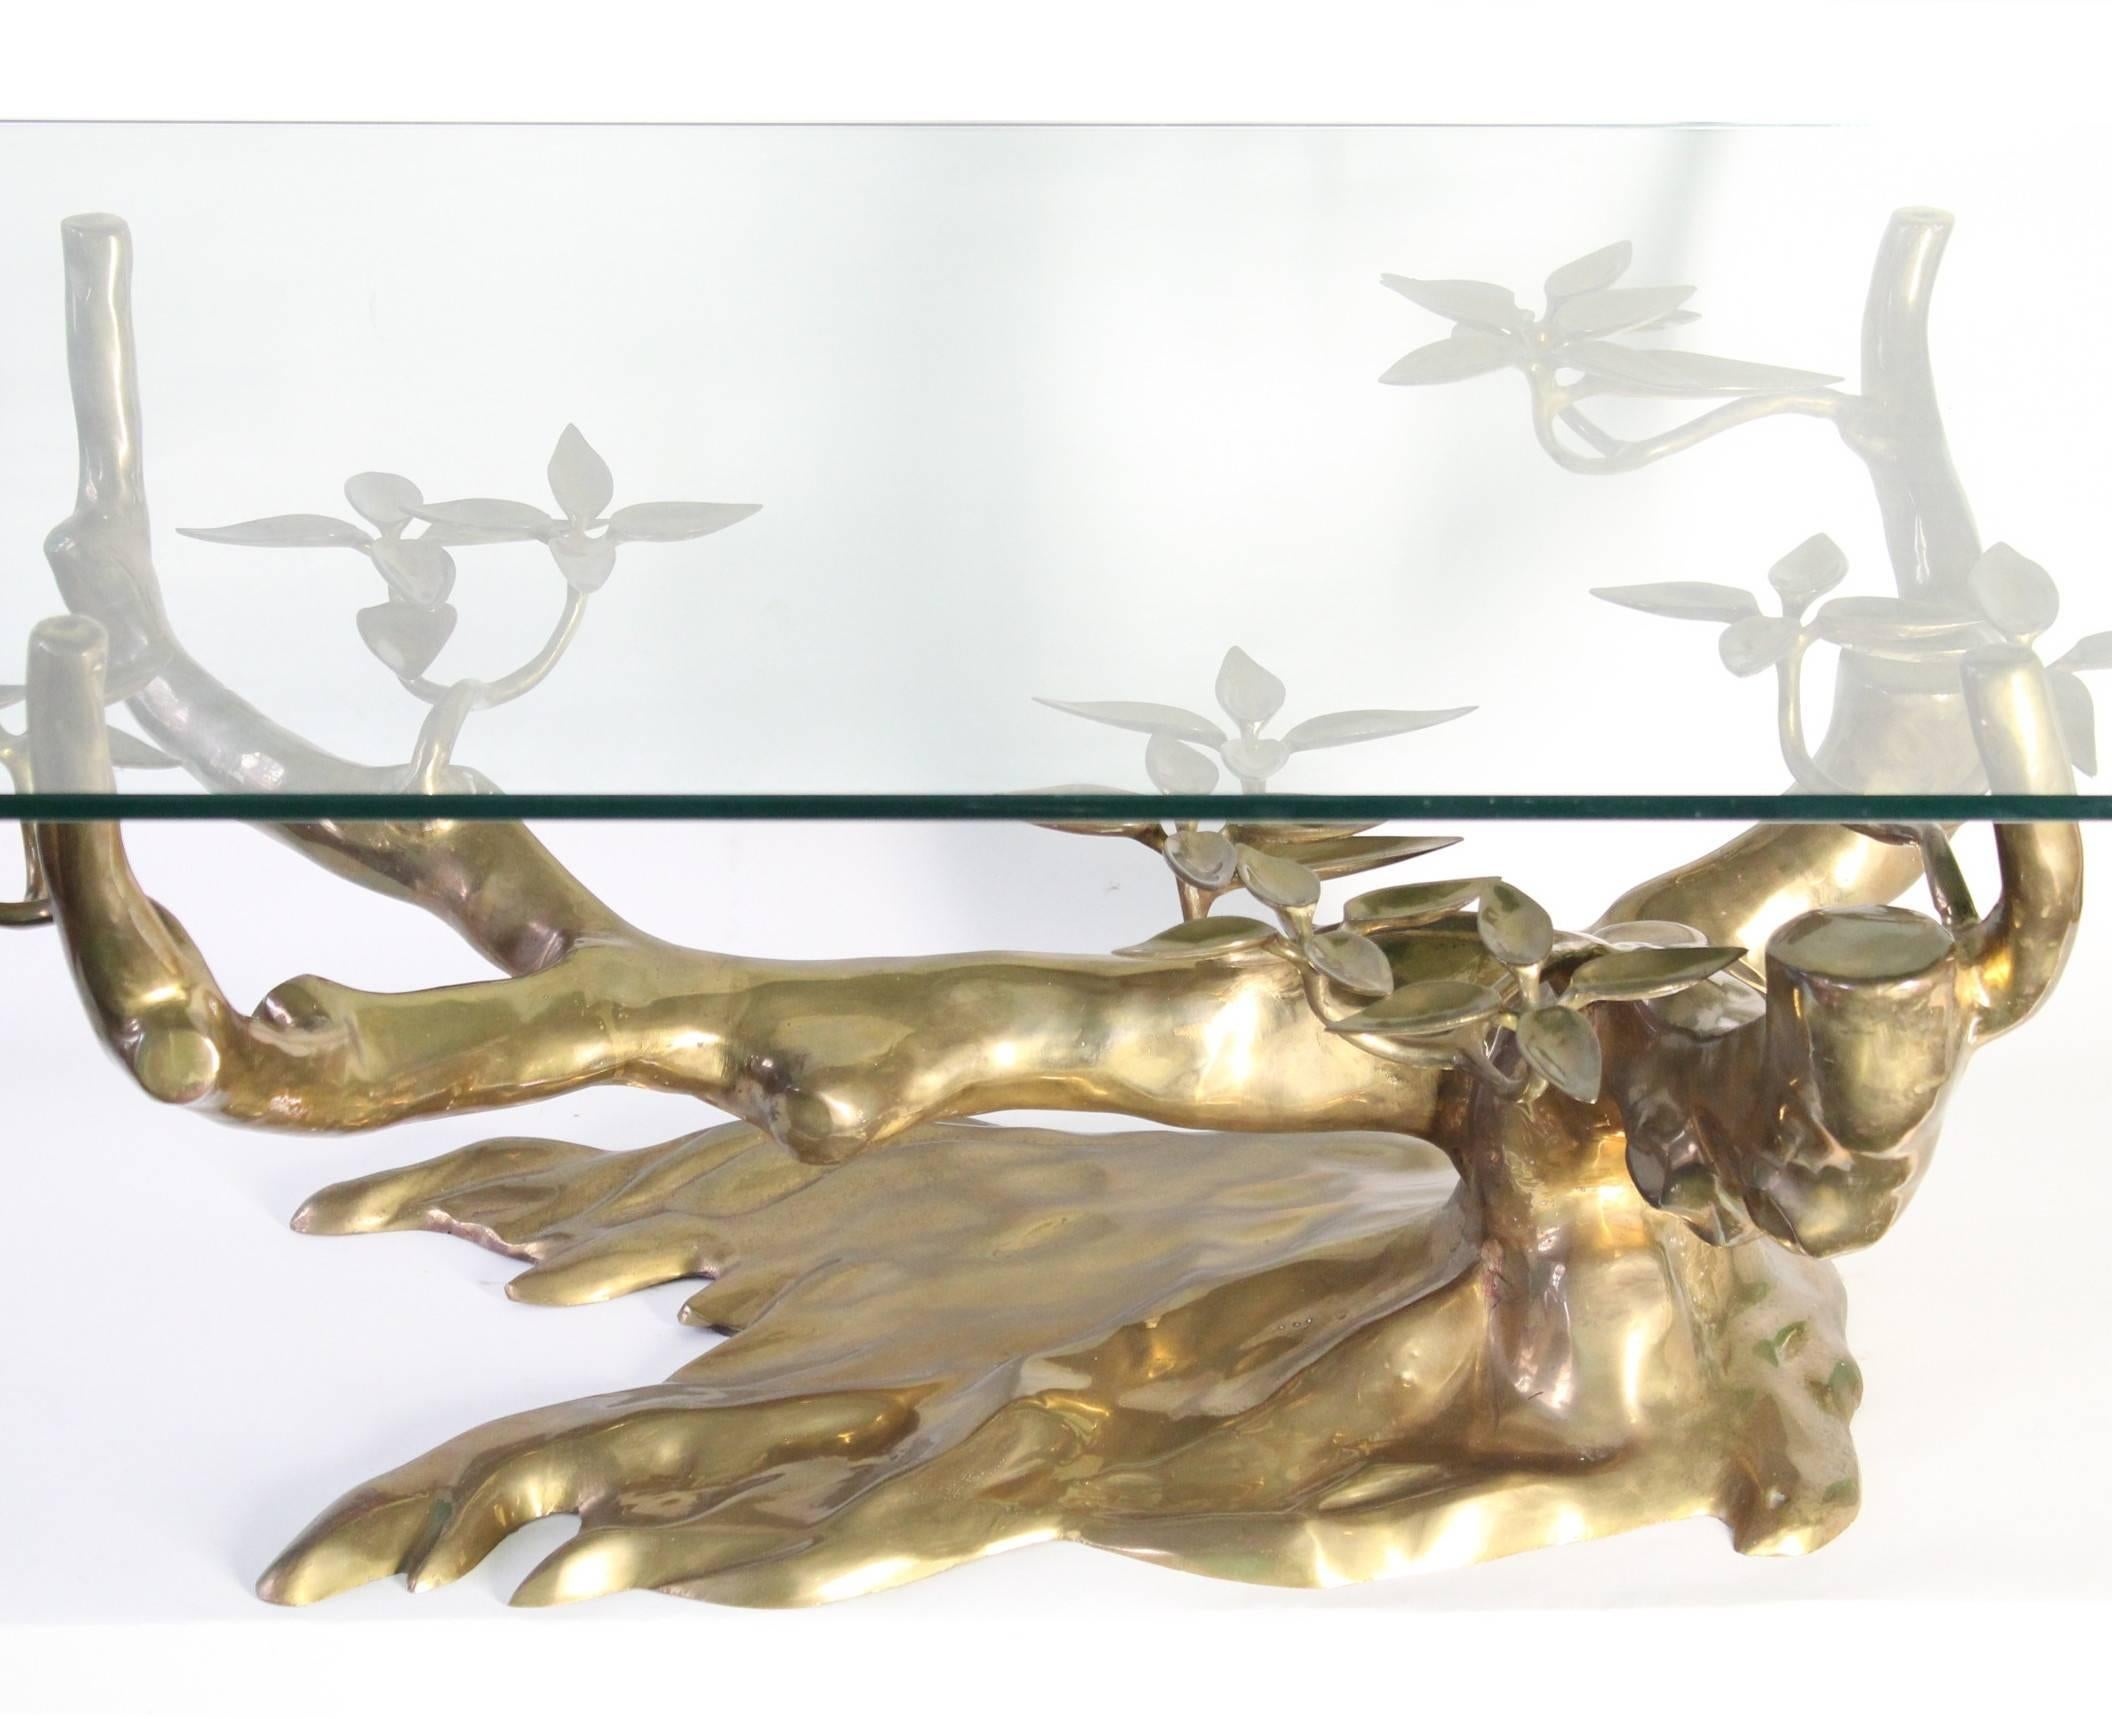 This highly sculptural coffee table features a brass bonsai tree as base, with beautifully gnarled branches and foliage; dimensions reflect inclusion of glass top. Good condition, consistent with age and prior use.

9390